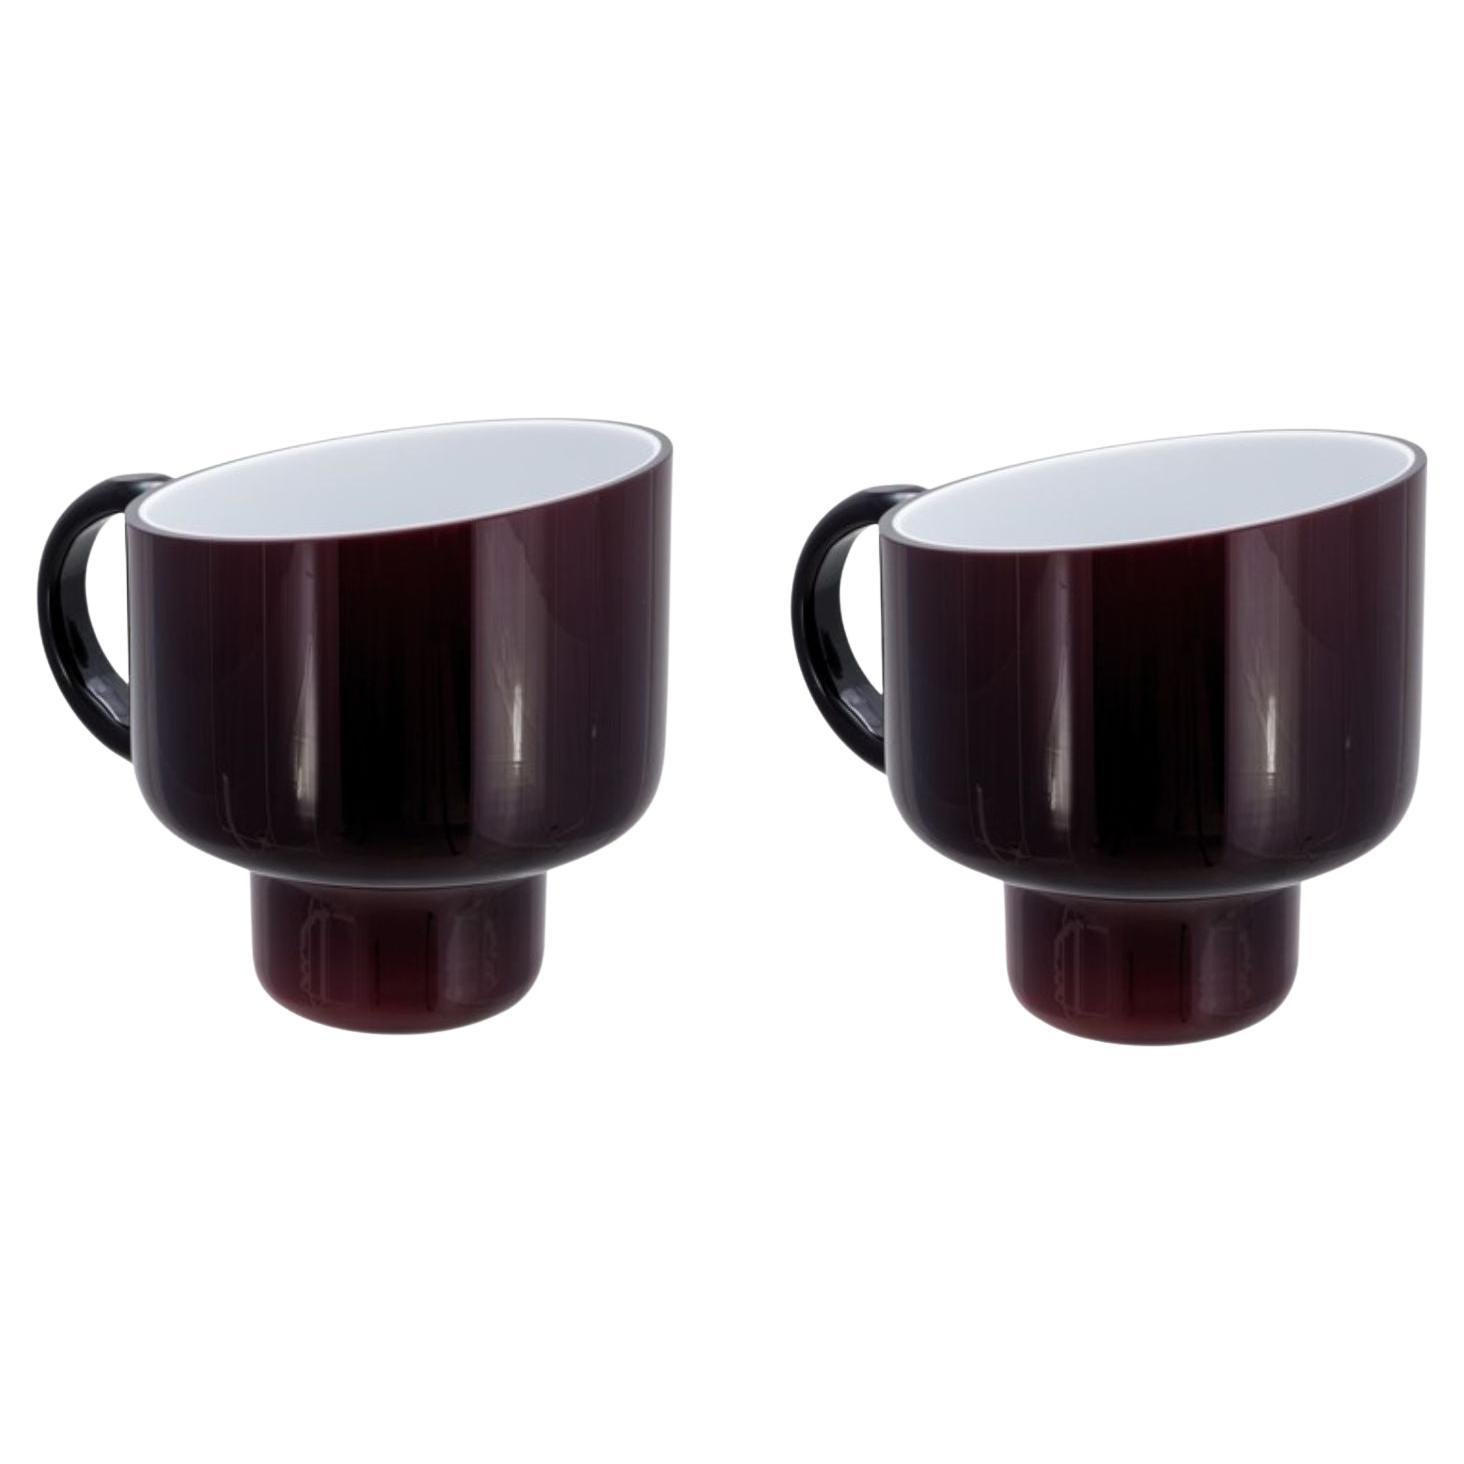 Set of 2 Carafes Burgundy and Opal White by Pulpo